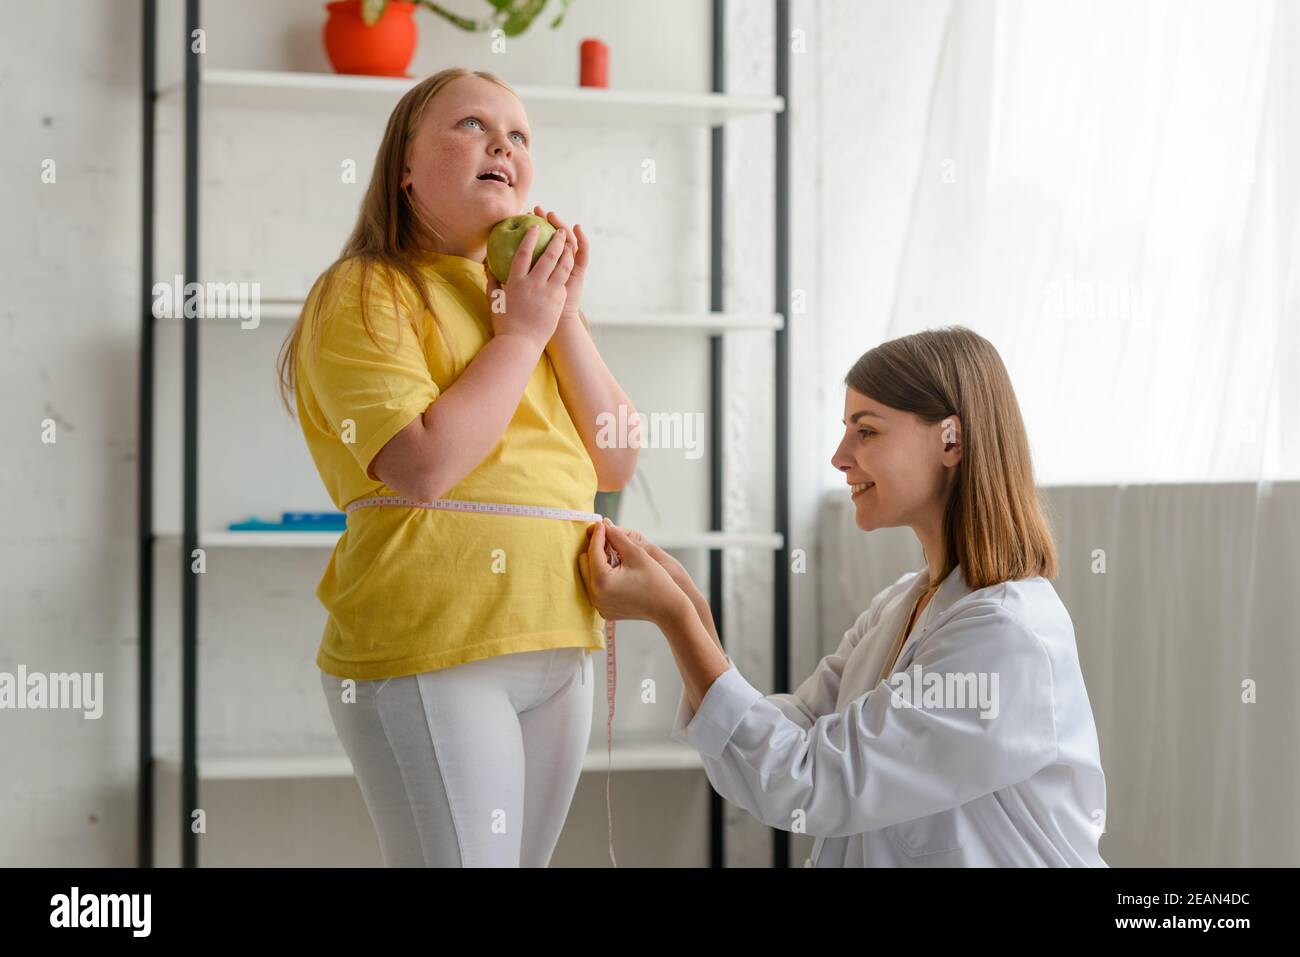 Young girl on weight loss program. Friendly doctor measuring her waist Stock Photo